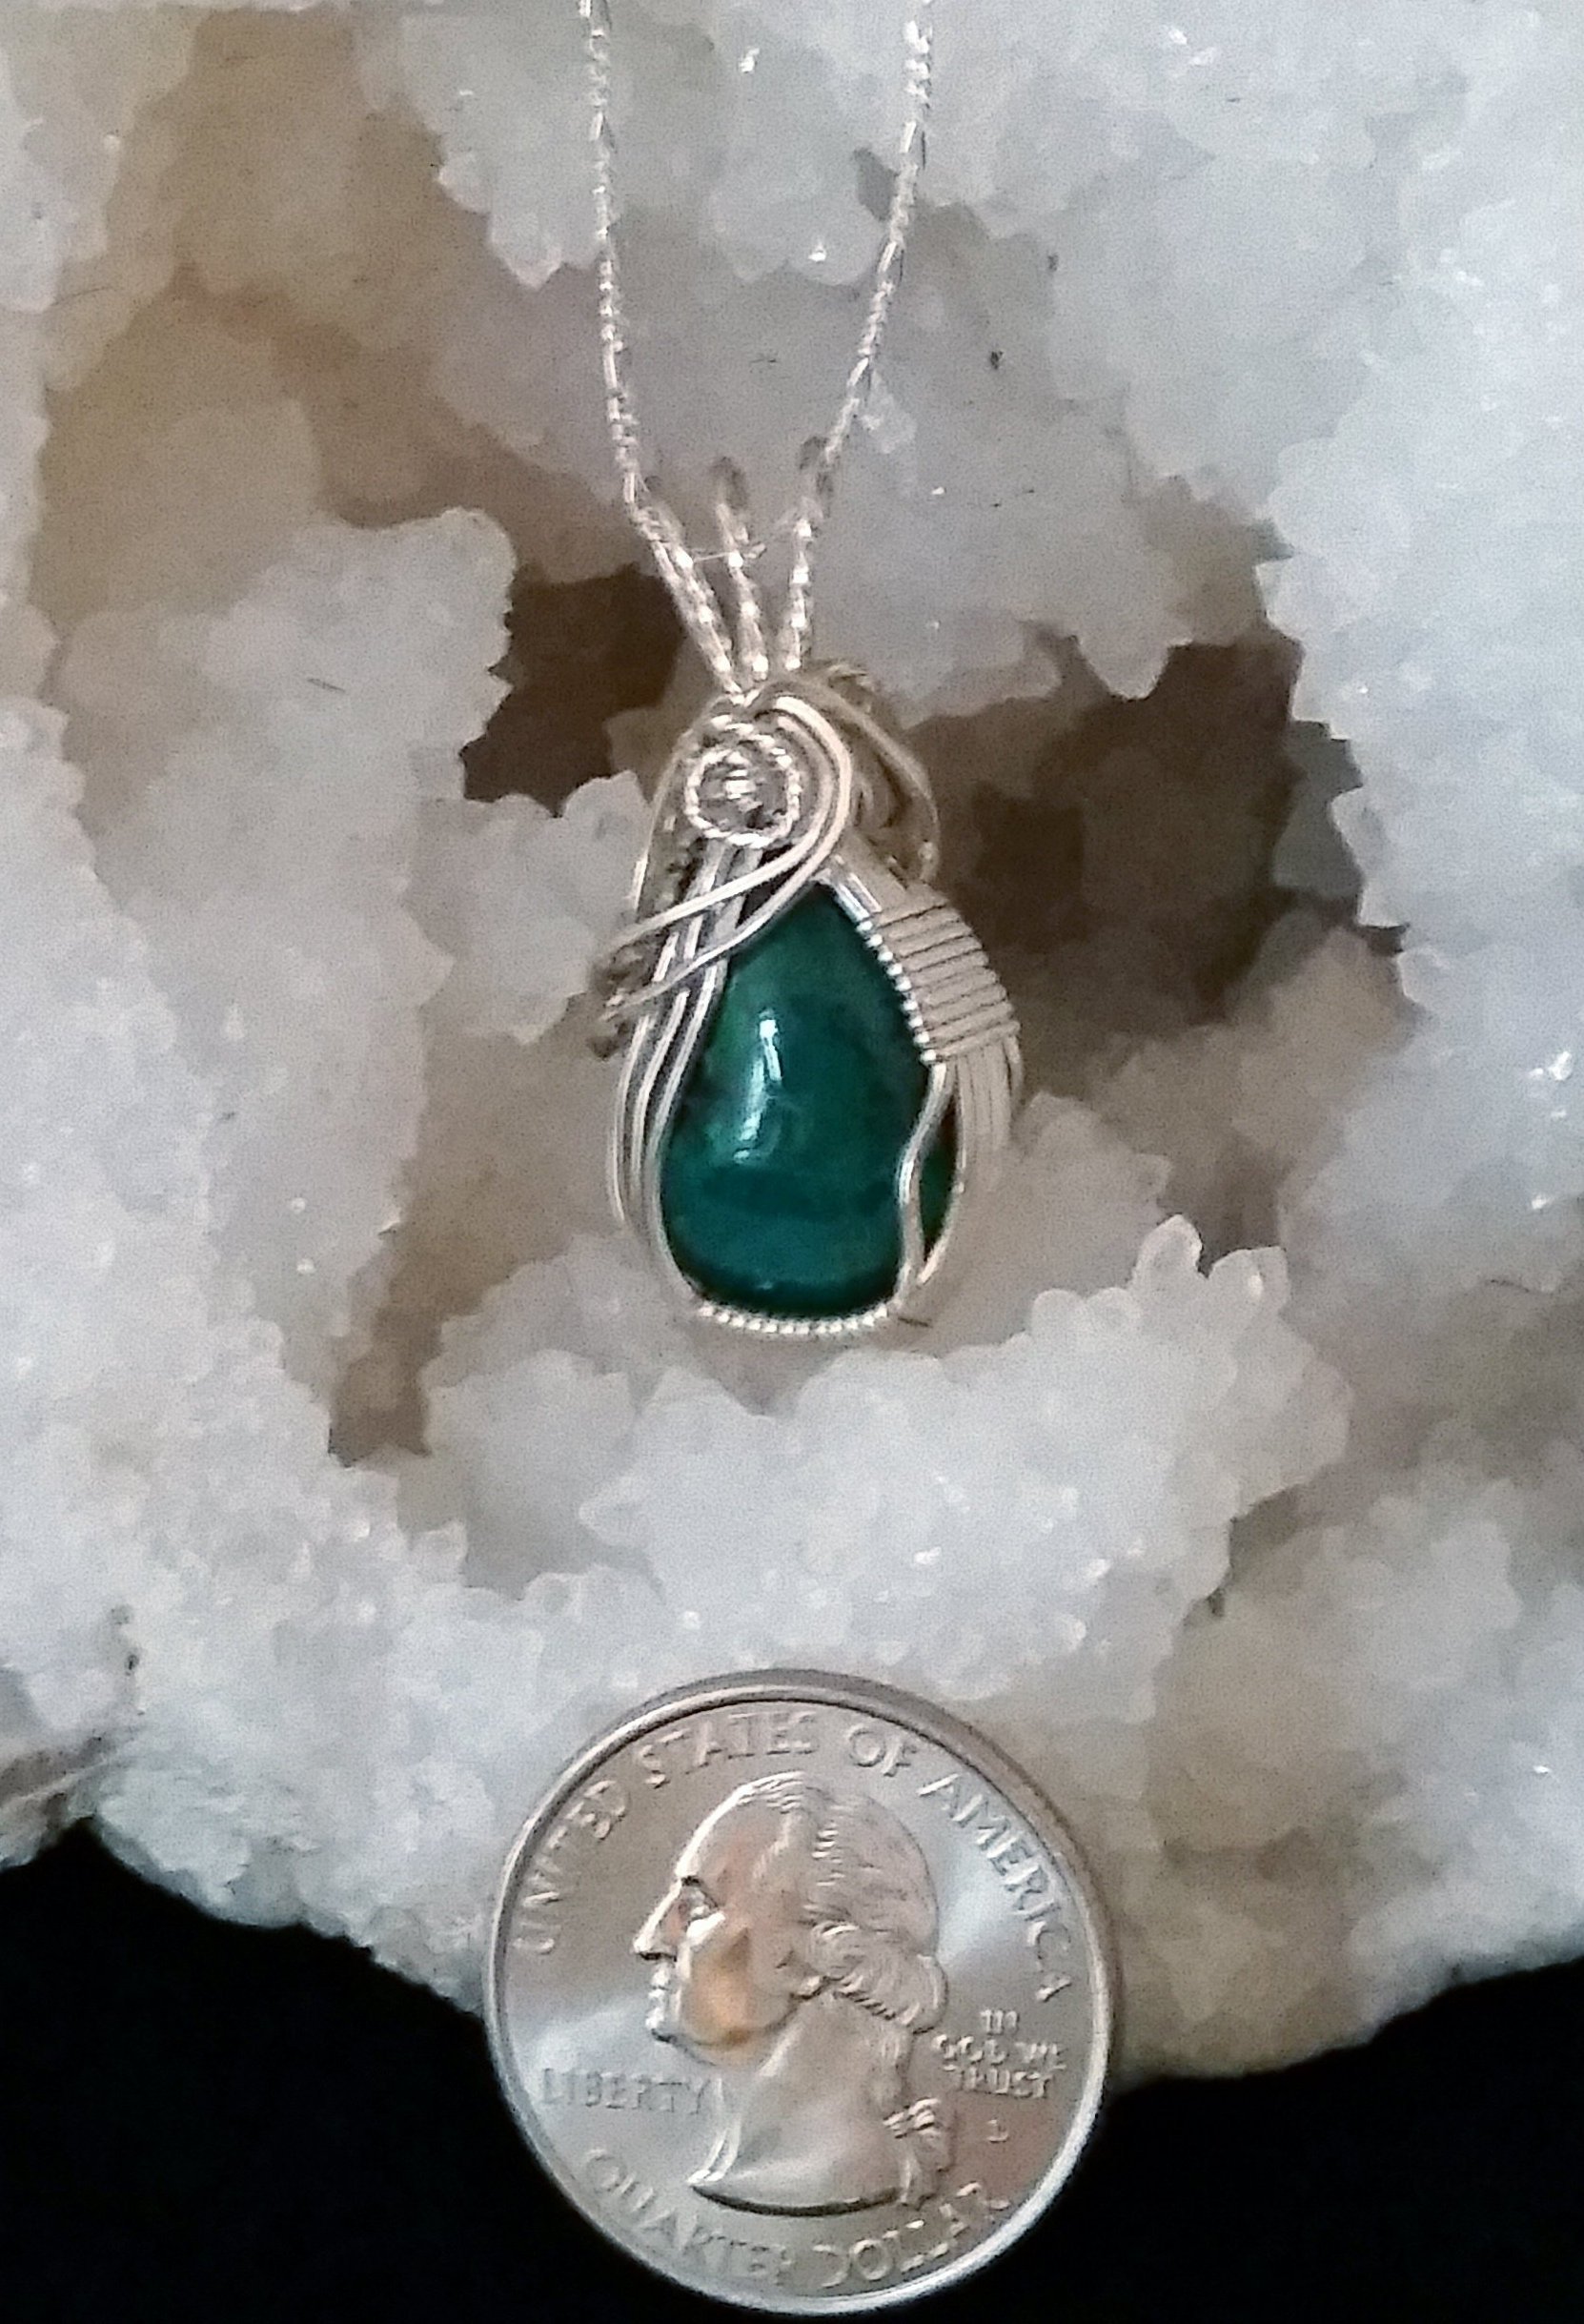 This beautiful Malachite-Chrysocolla pendant brings serenity, tranquility, and calming energies, making it a beautiful crystal to wear as a pendant. It brings the energy of new beginnings, helping to facilitate smooth transitions in times of change.